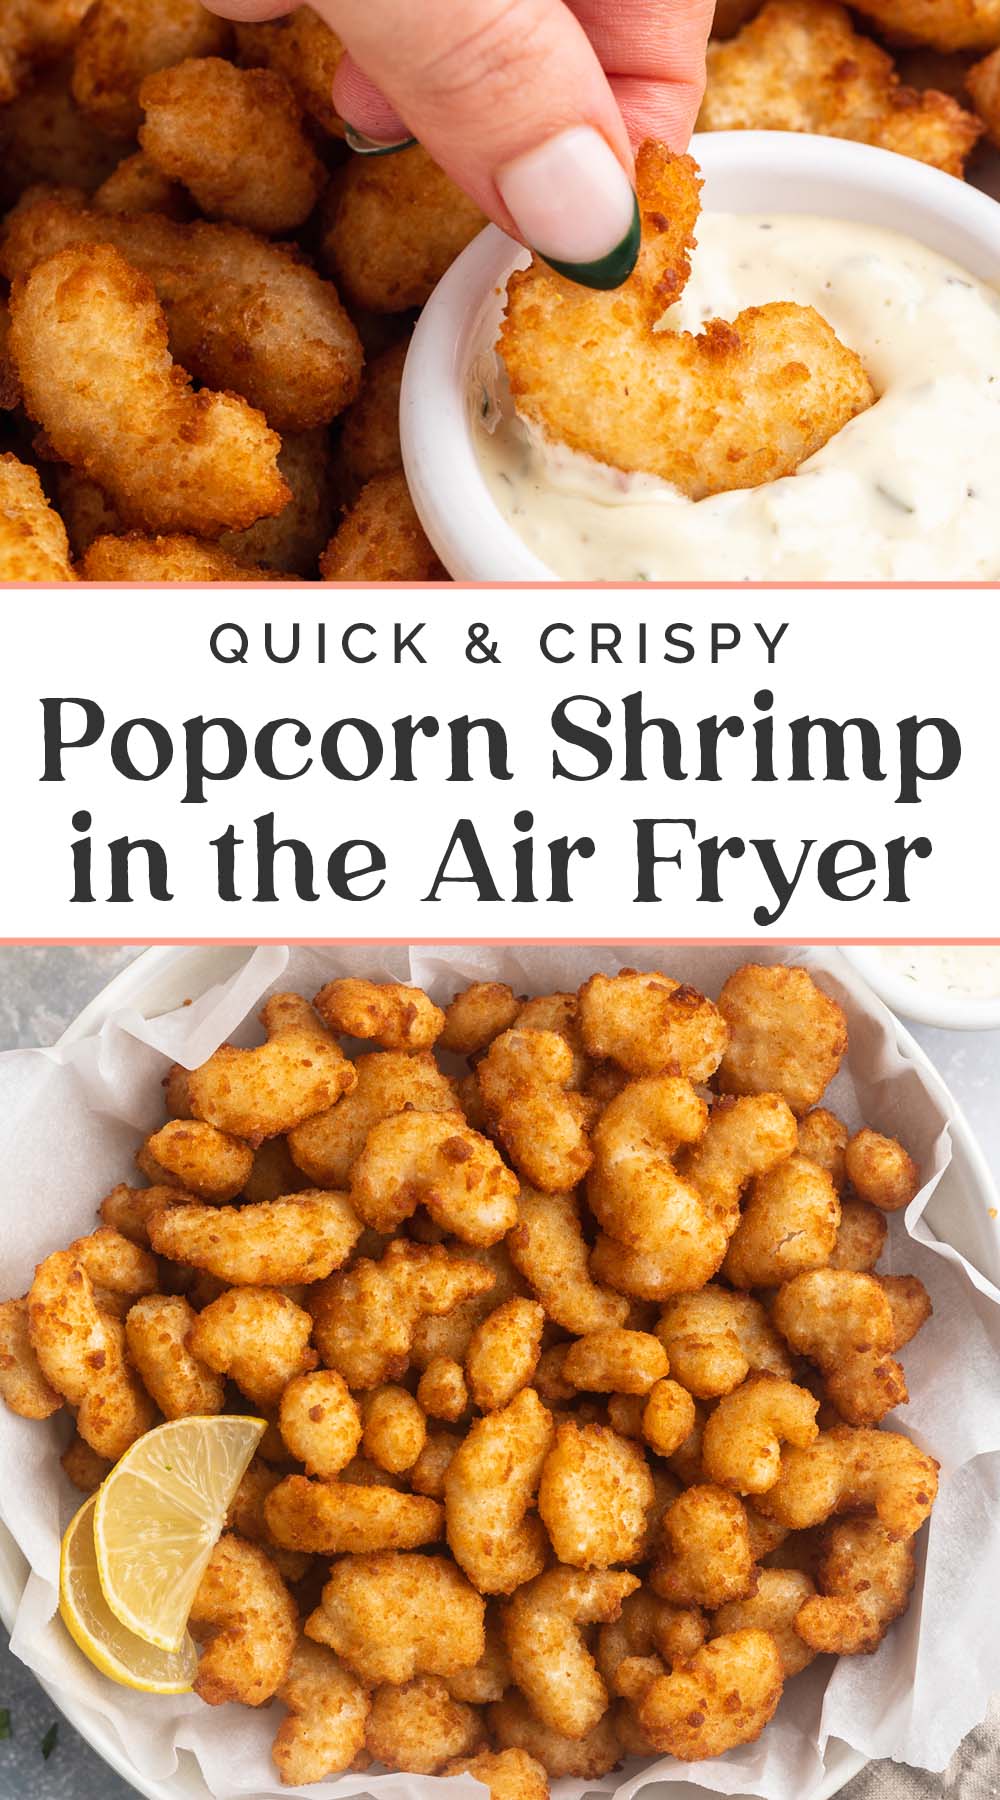 Pin graphic for popcorn shrimp in the air fryer.